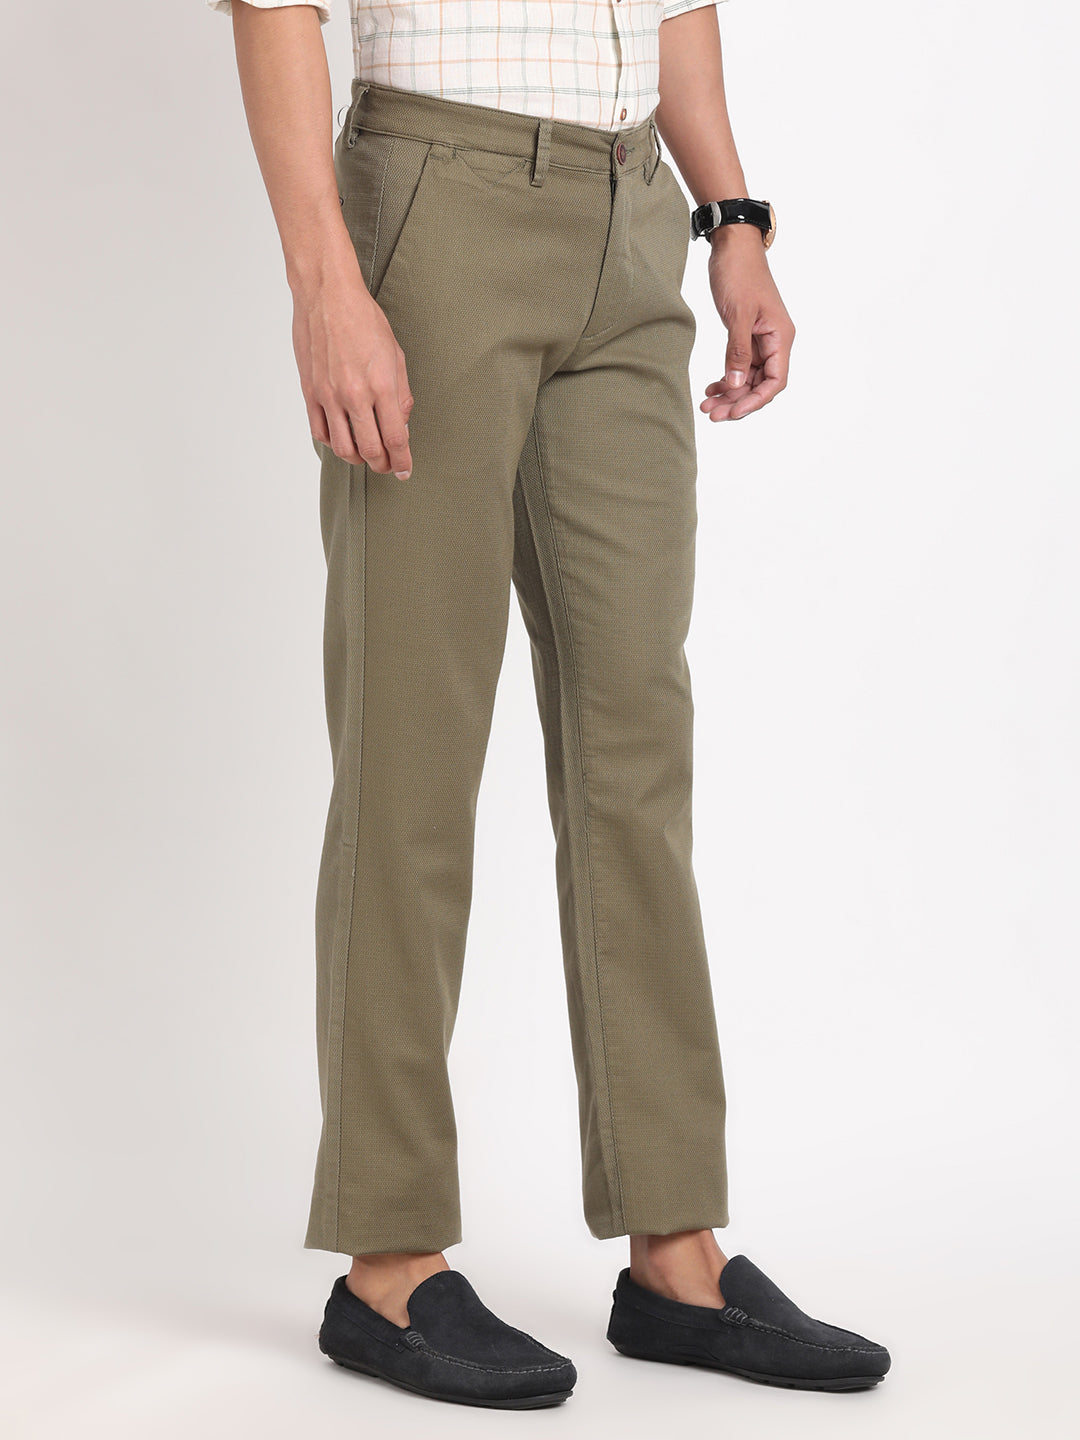 Cotton Stretch Olive Dobby Ultra Slim Fit Flat Front Casual Trouser